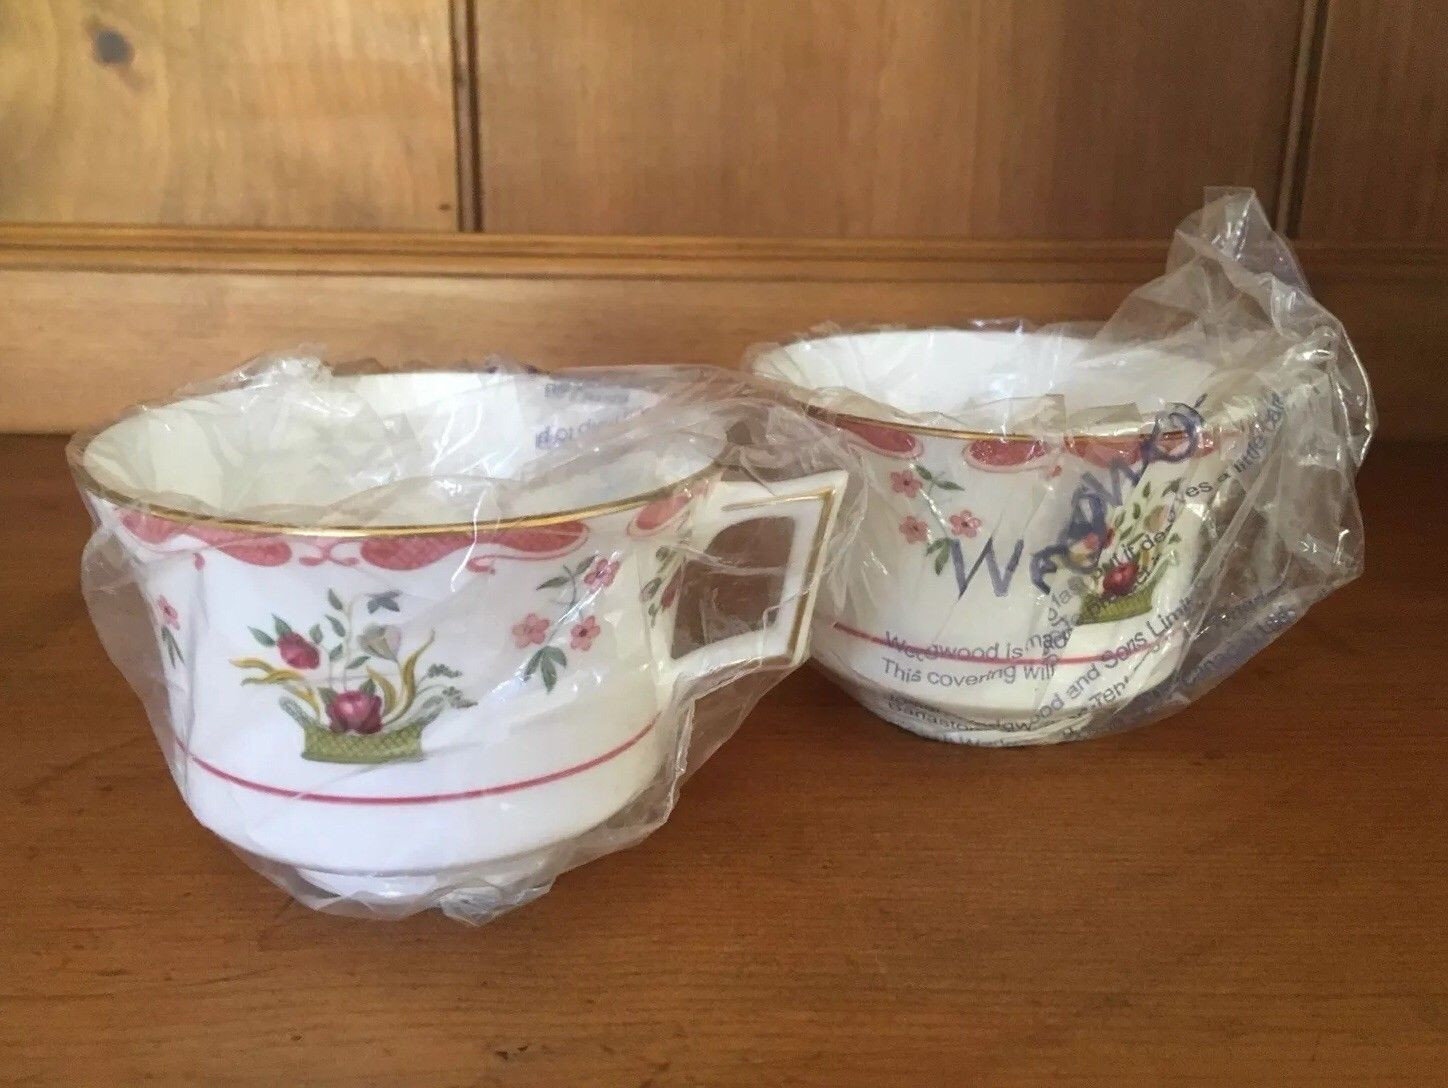 29 Elegant Wedgwood Green Jasperware Vase 2024 free download wedgwood green jasperware vase of set of 2 wedgwood bianca williamsburg tea cups only r4499 fine bone throughout 1 of 7only 1 available